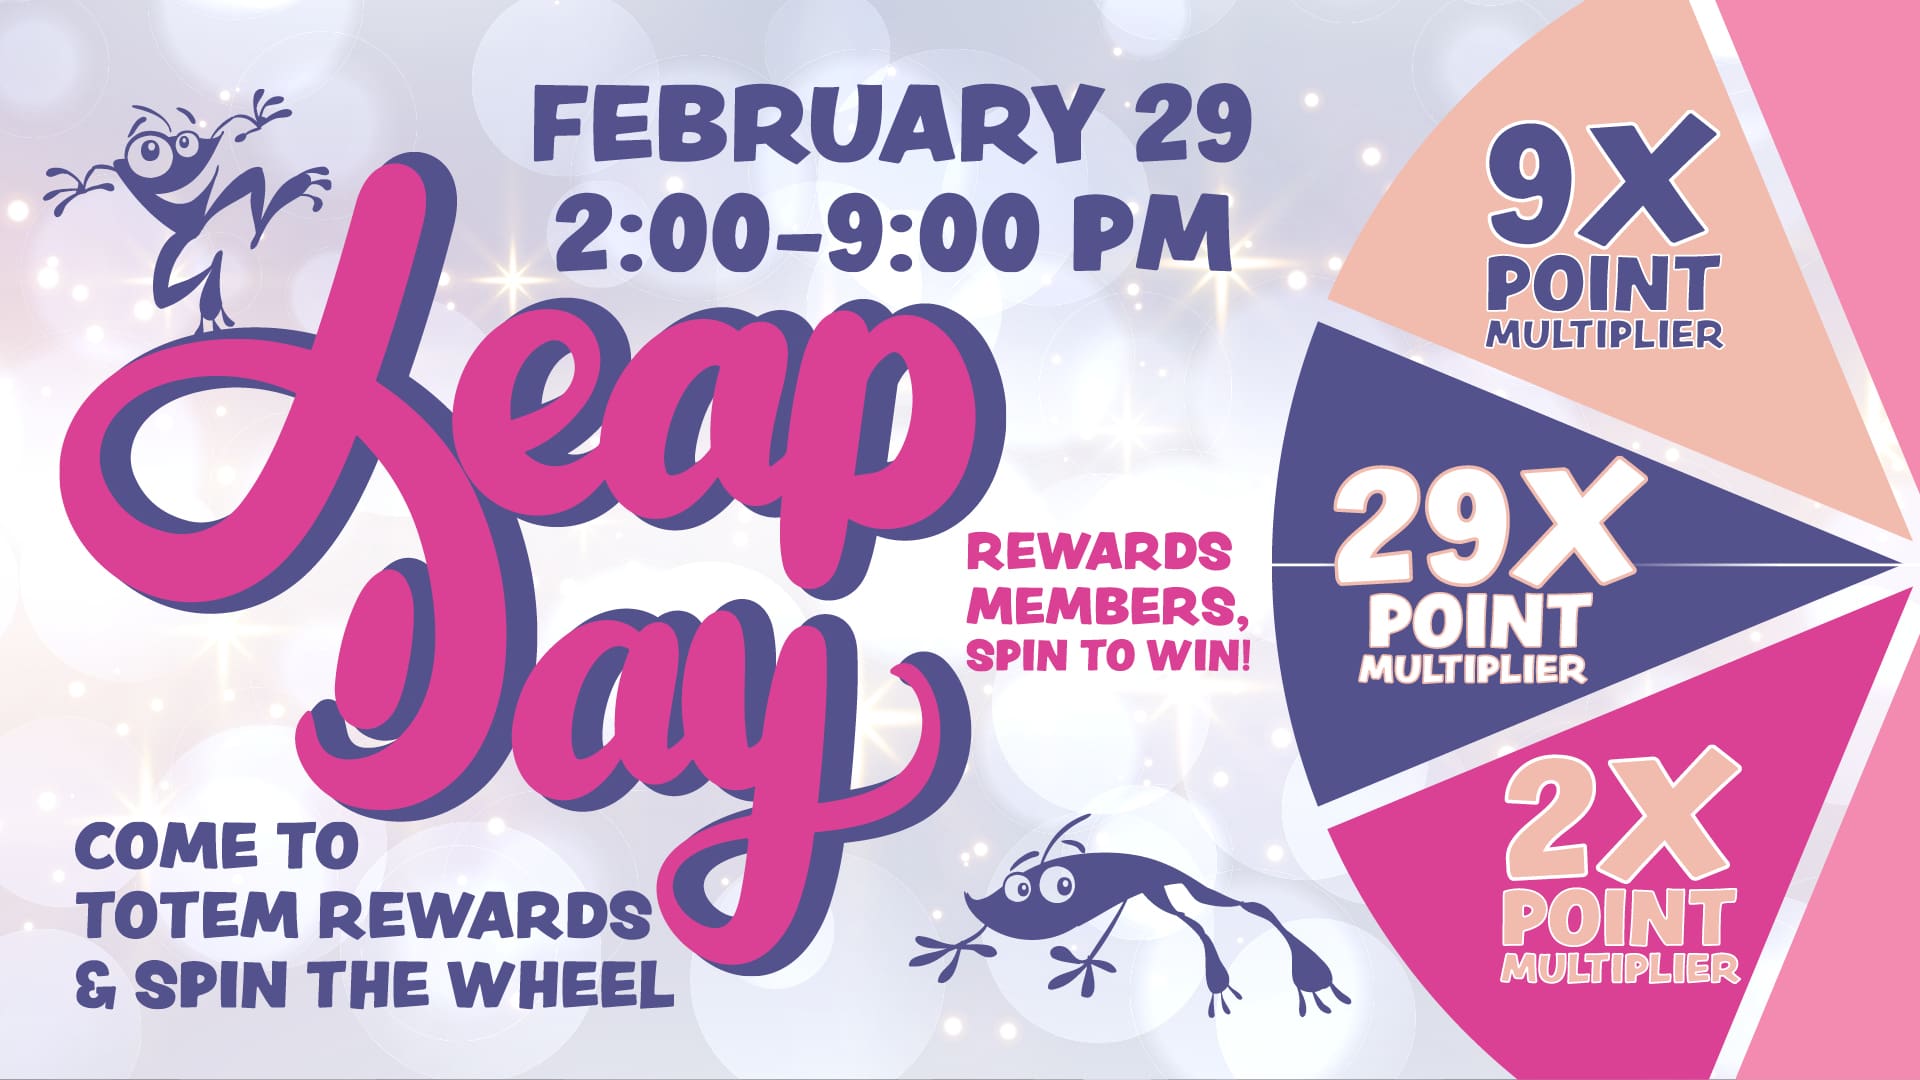 Leap Day Point Multipliers